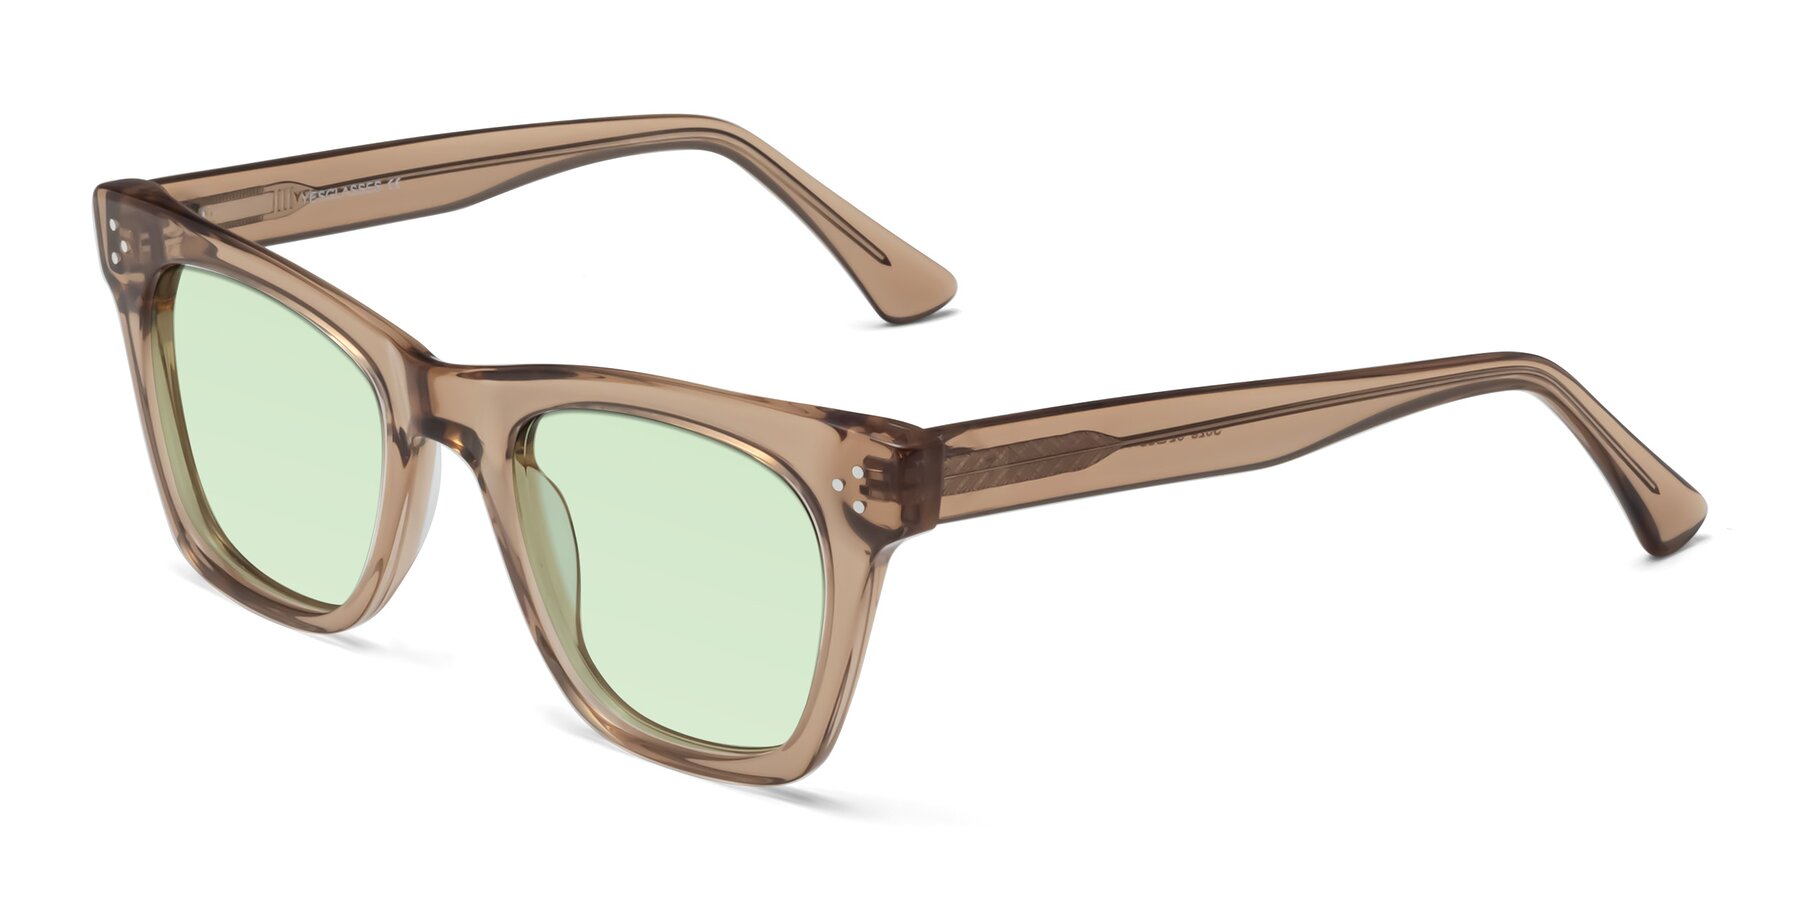 Angle of Soza in Amber with Light Green Tinted Lenses